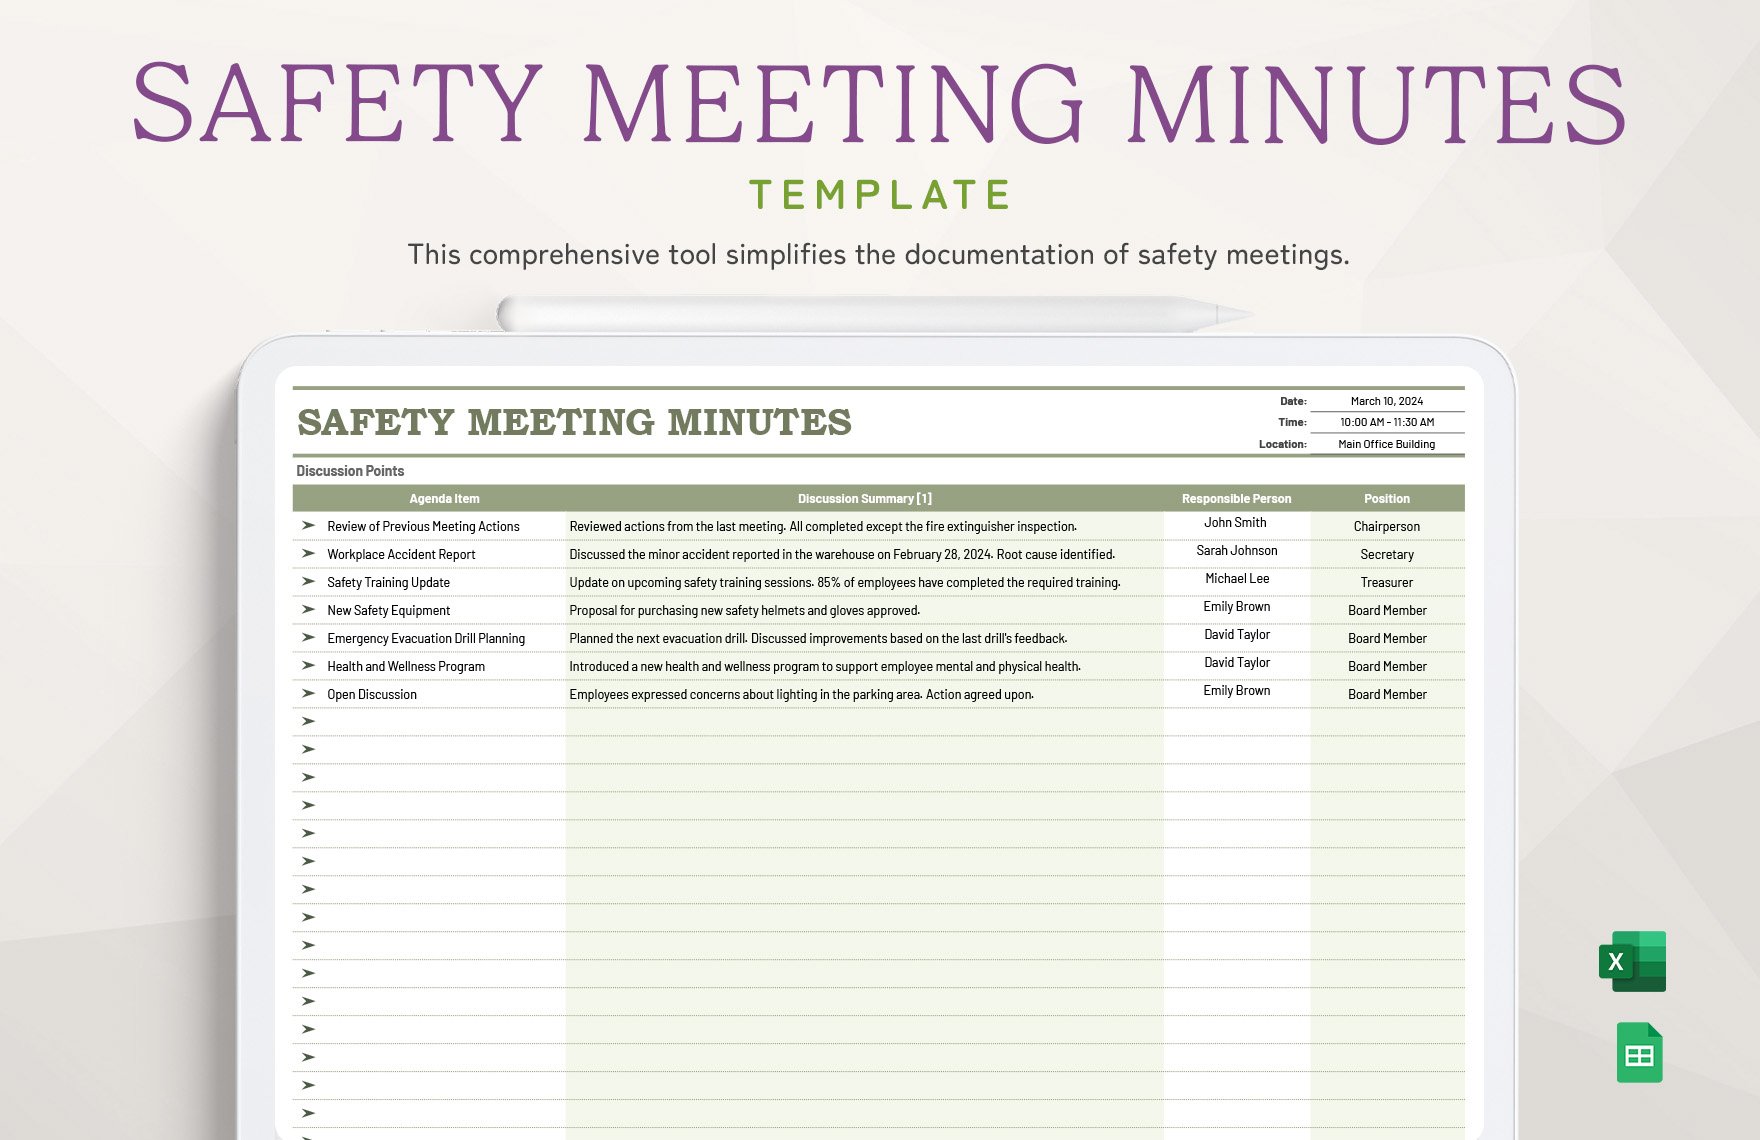 Safety Meeting Minutes Template in Excel, Google Sheets